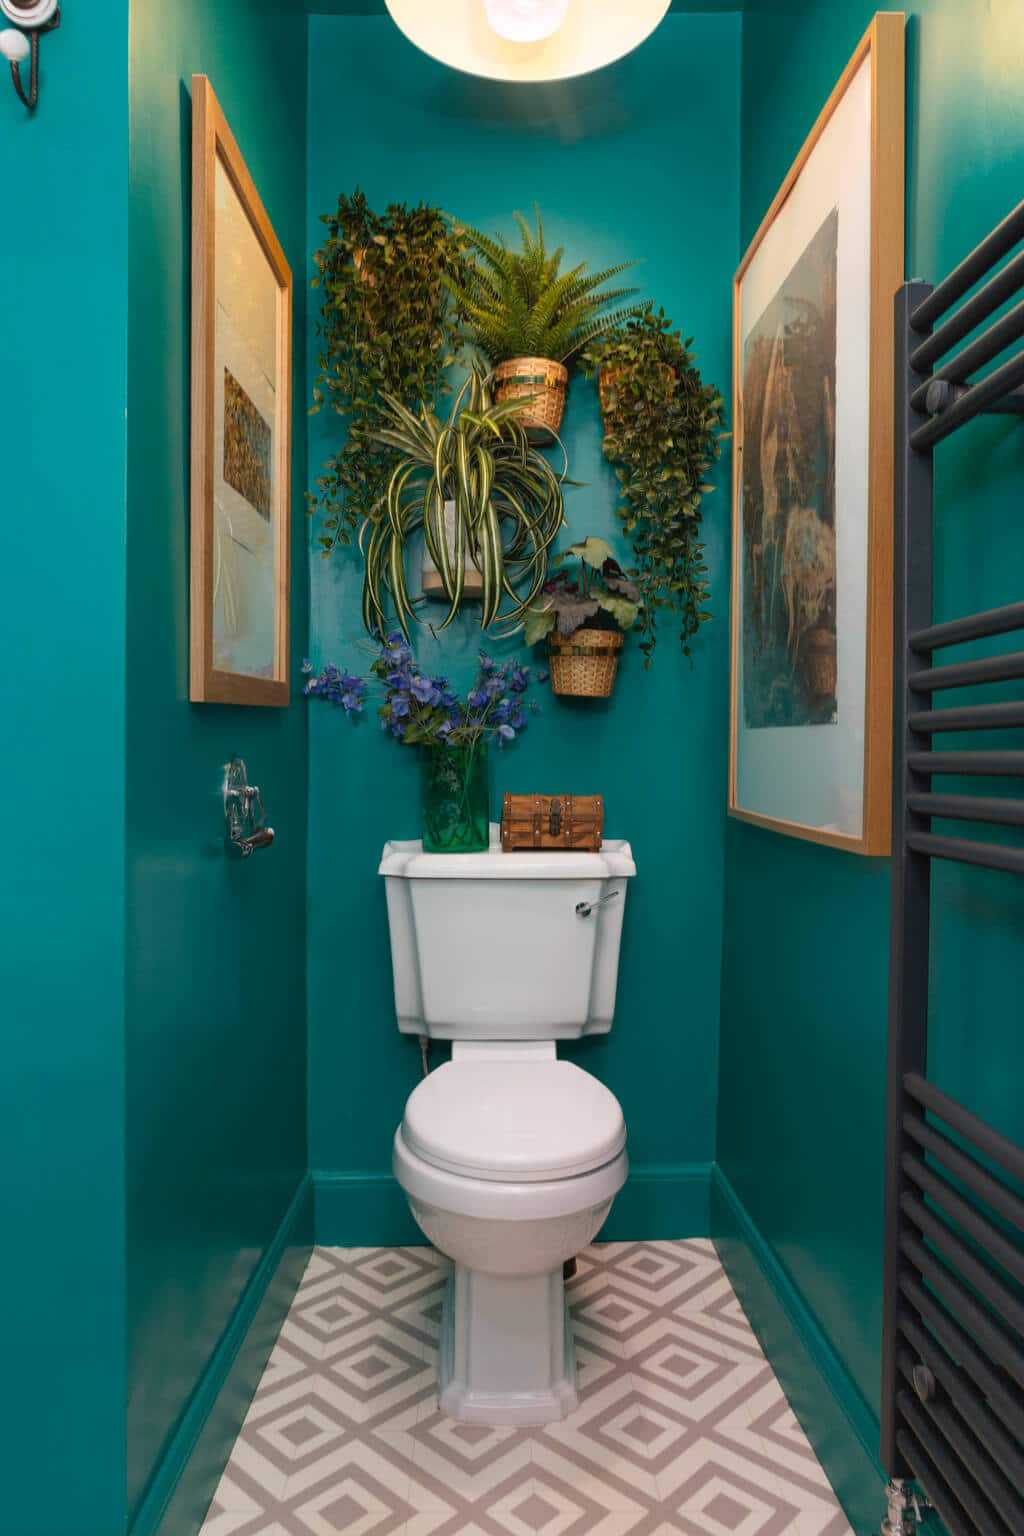 A white toilet sitting in a bathroom next to a green wall
